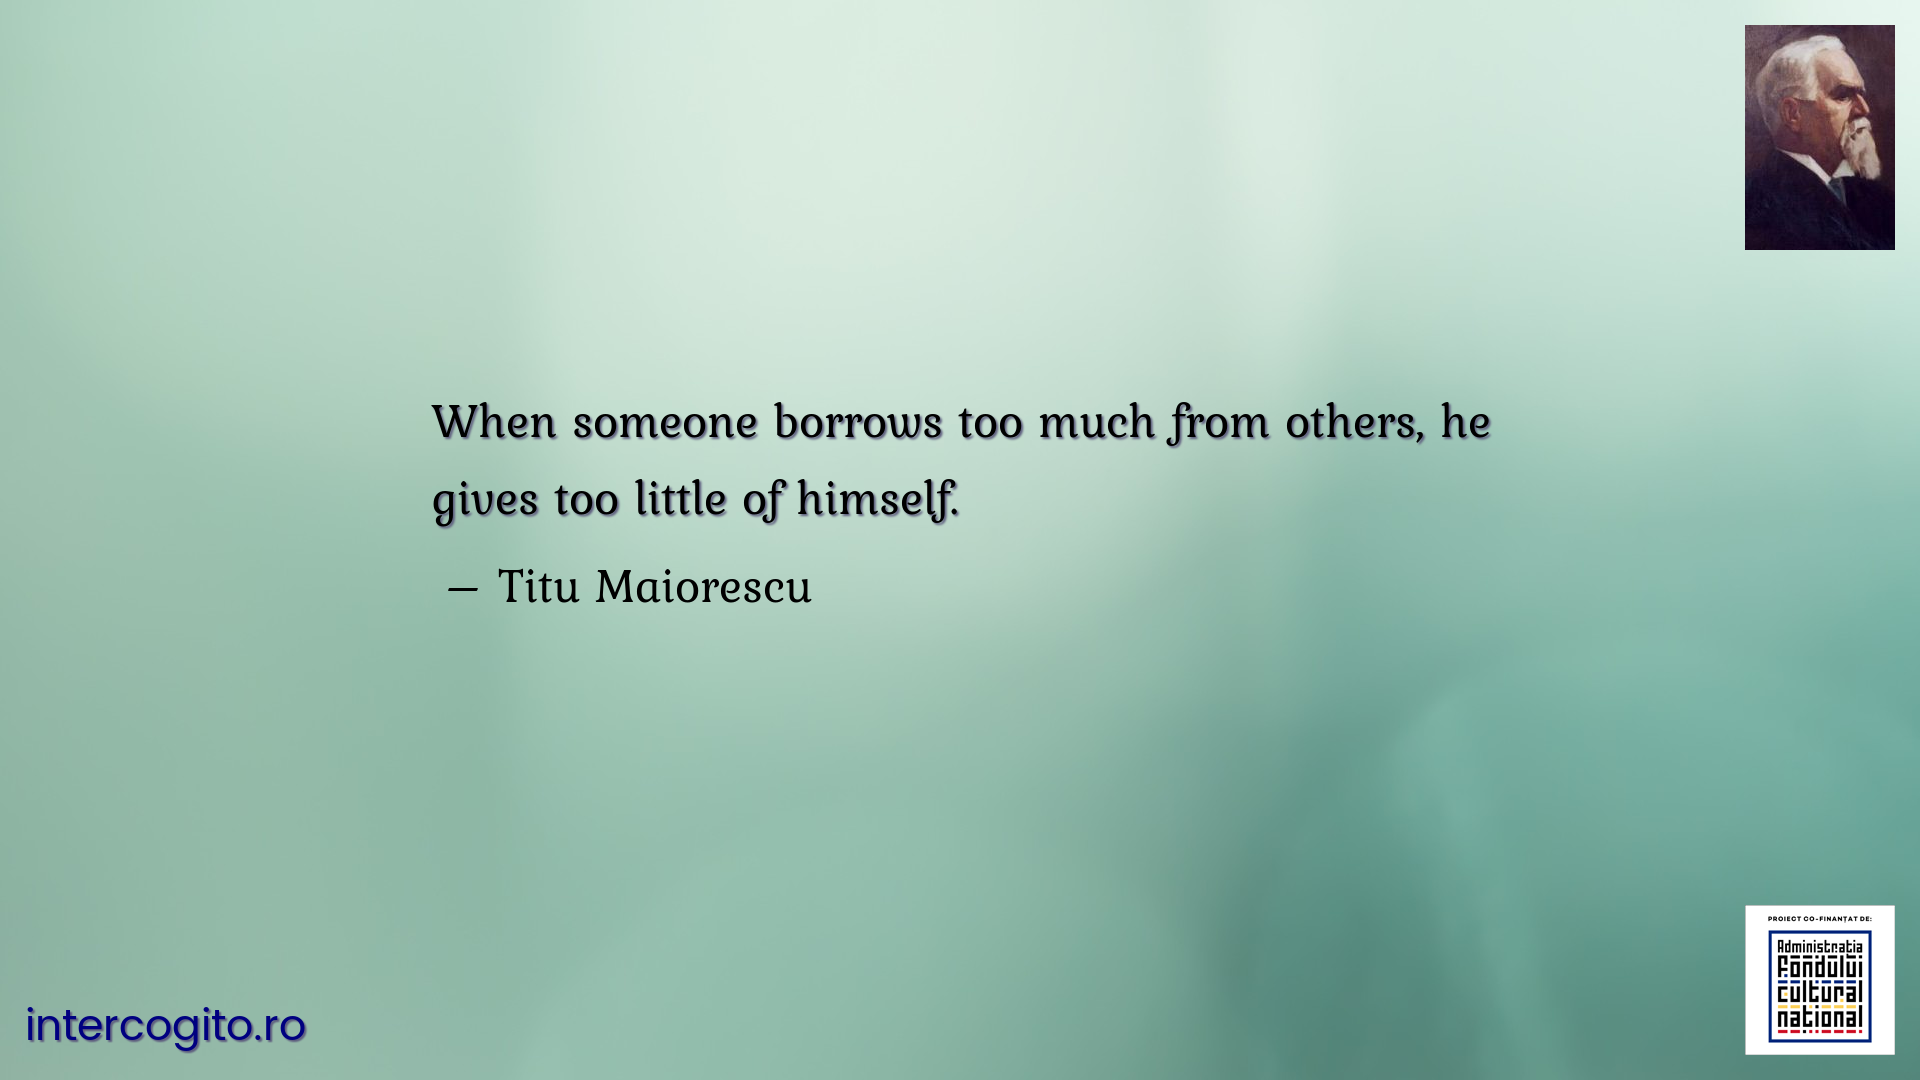 When someone borrows too much from others, he gives too little of himself.